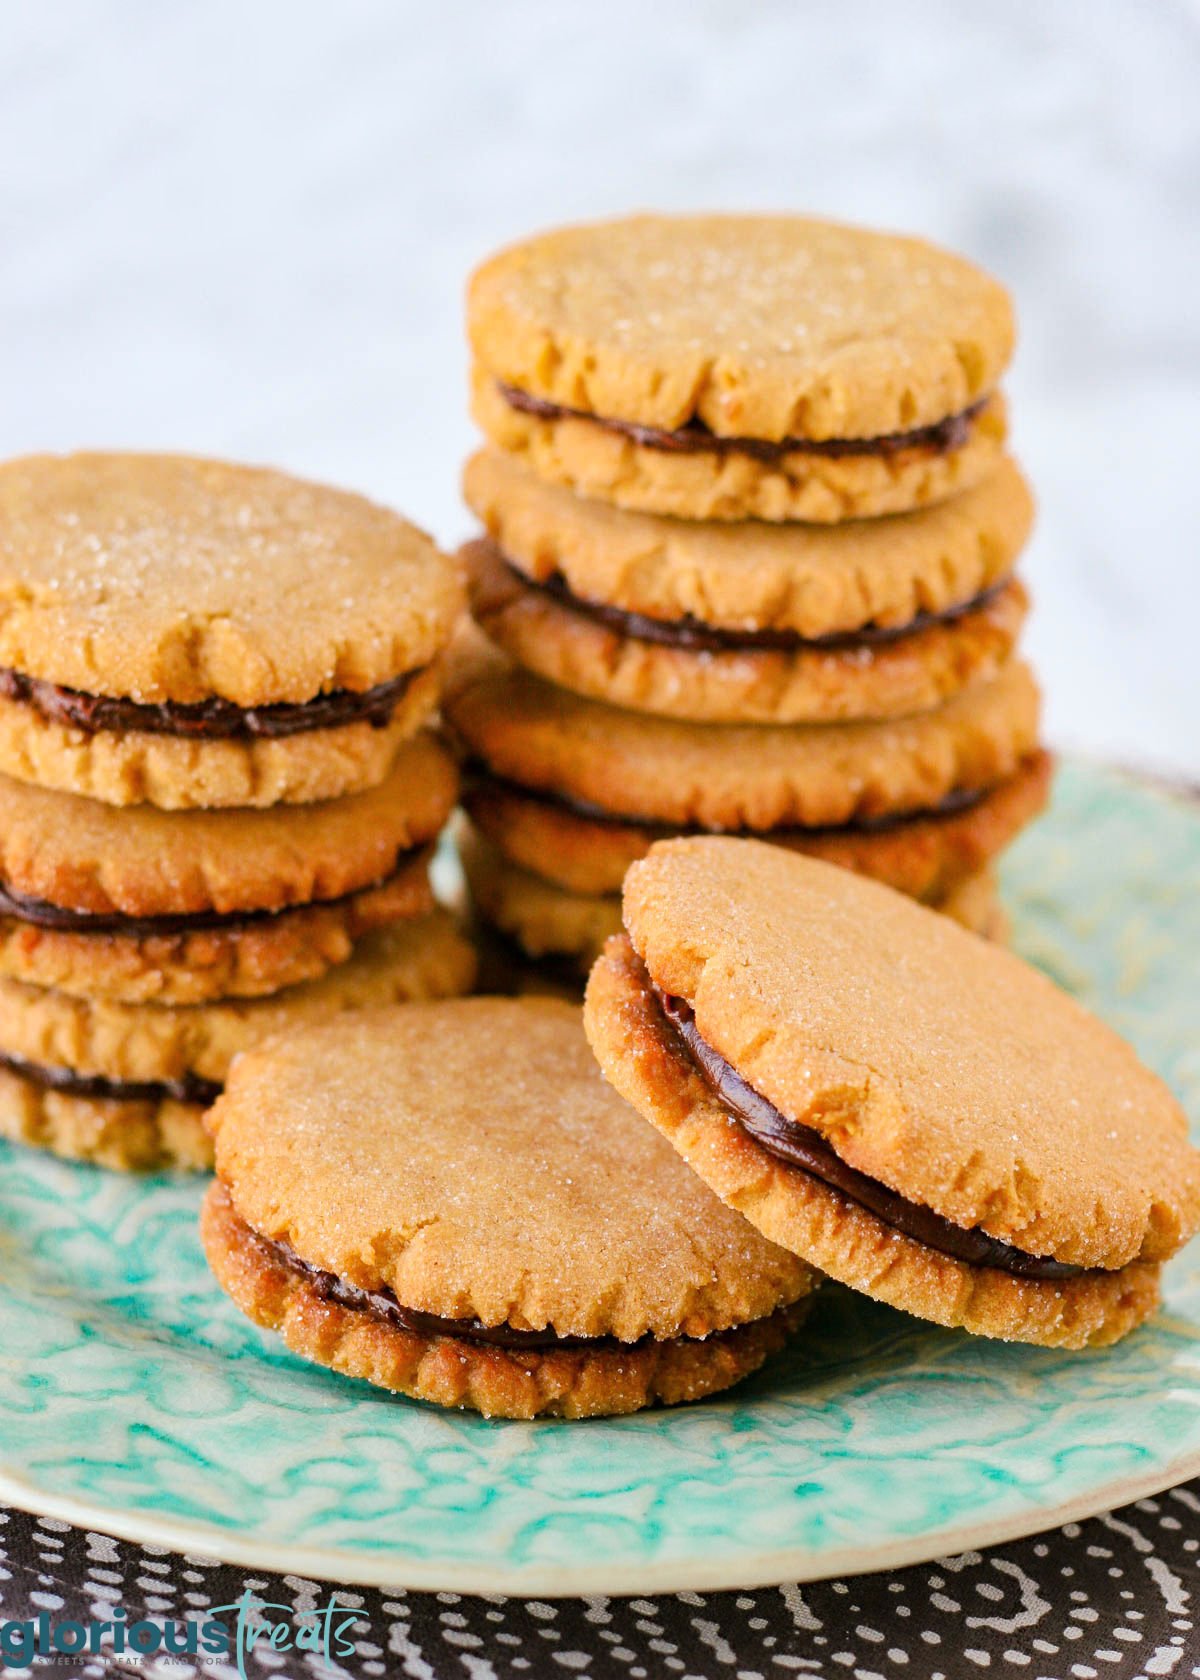 peanut butter cookies stuffed with chocolate ganache are stacked on a floral aqua plate.